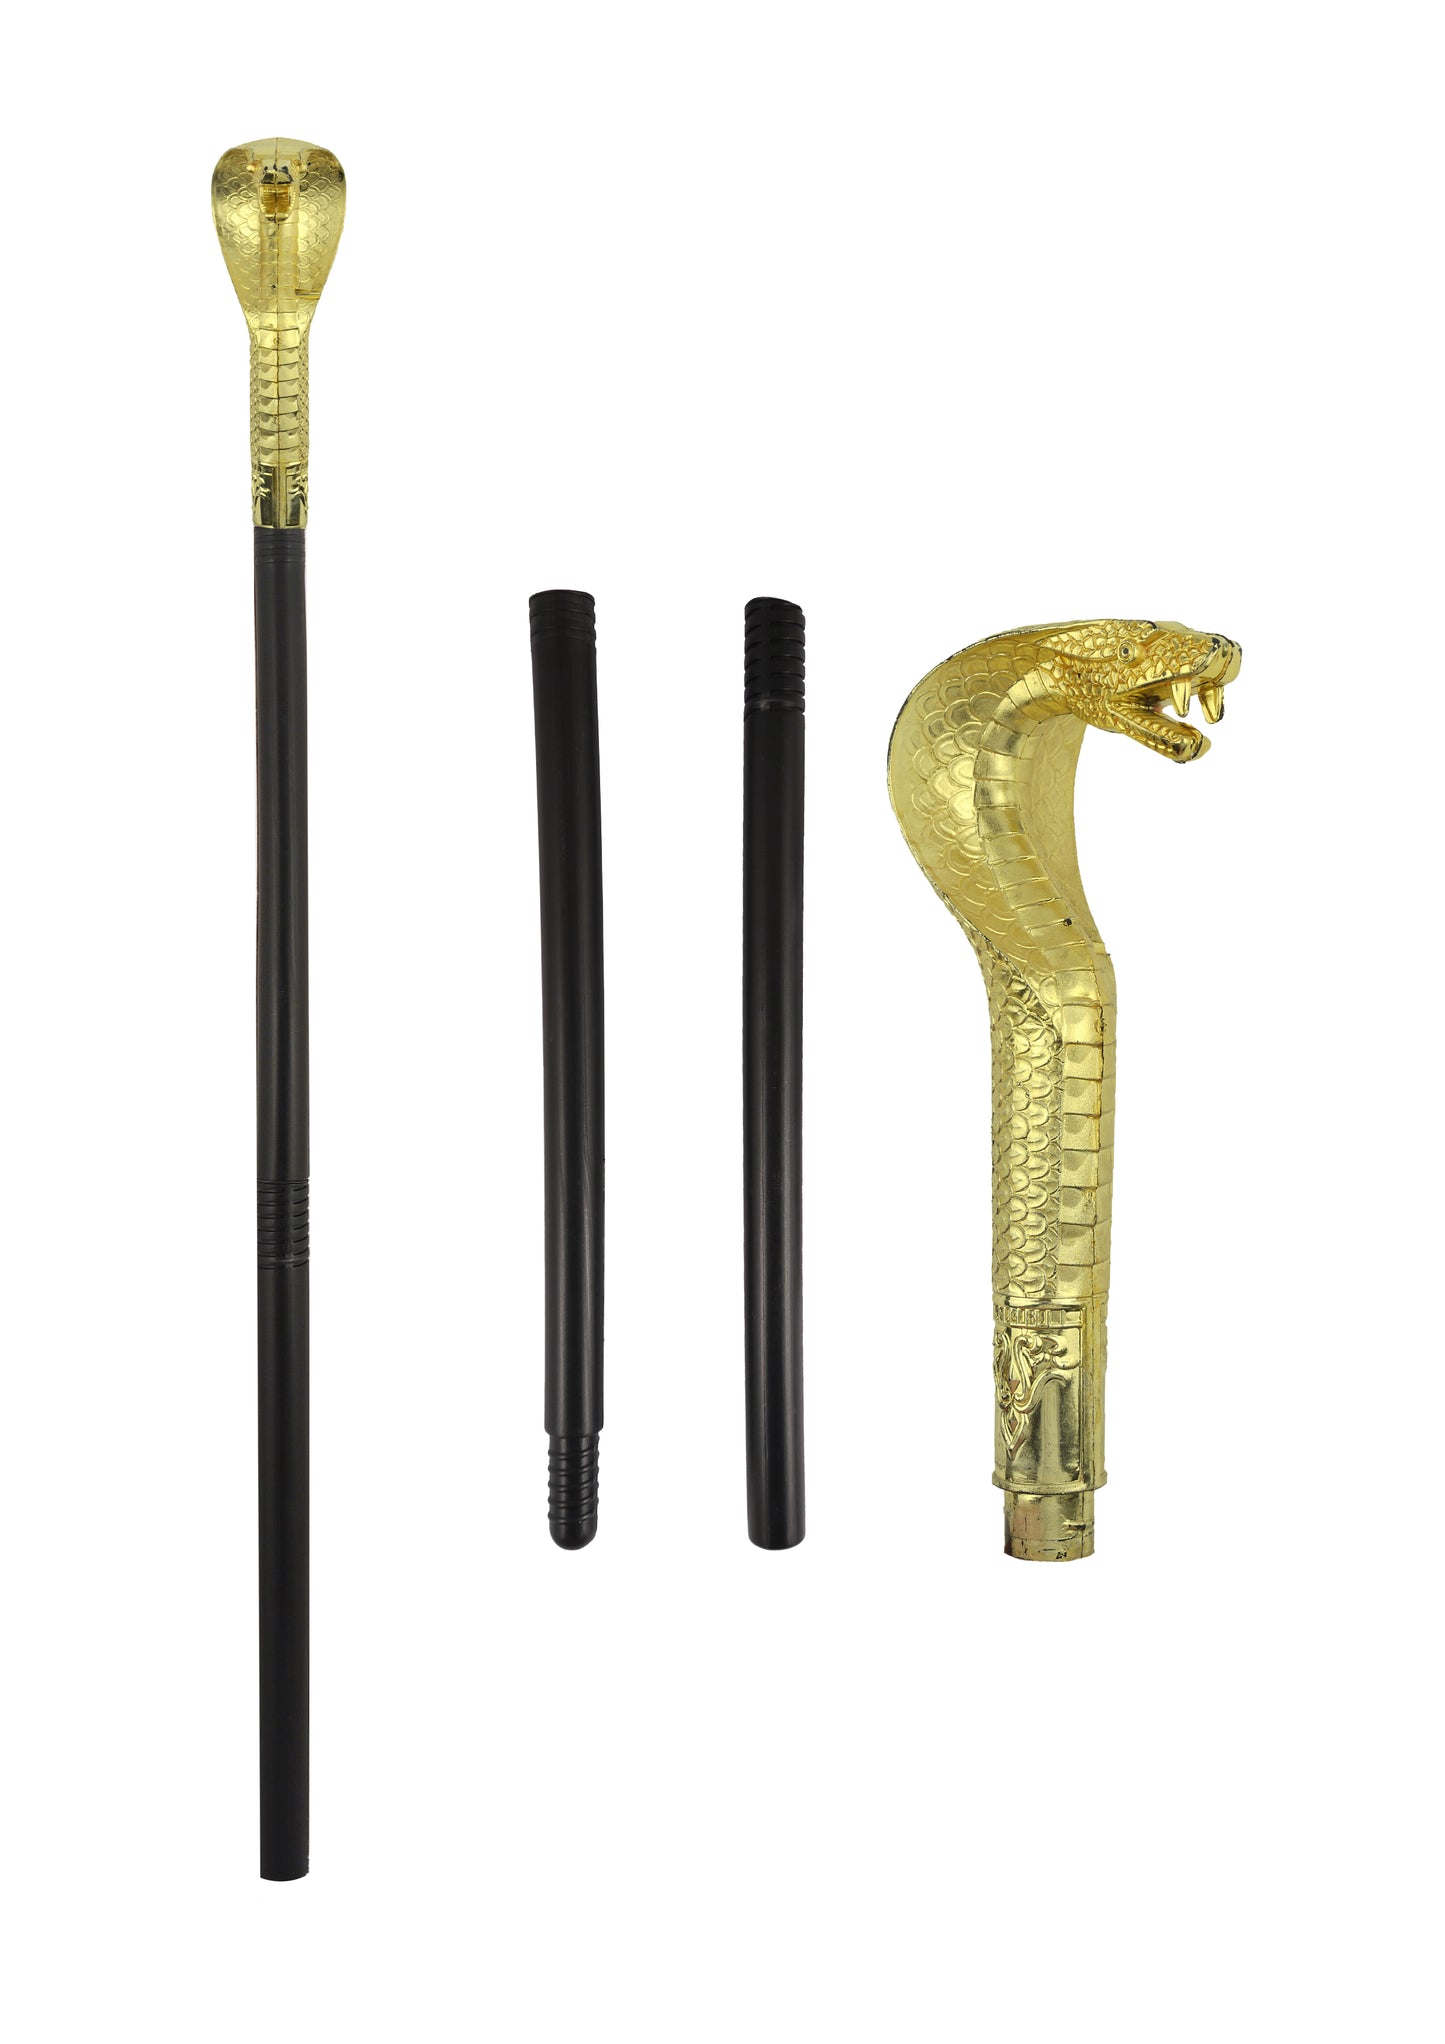 Stovepipe Top Hat & Snake Head Sceptre Set with White Gloves - Distinguished Costume Ensemble for Any Occasion